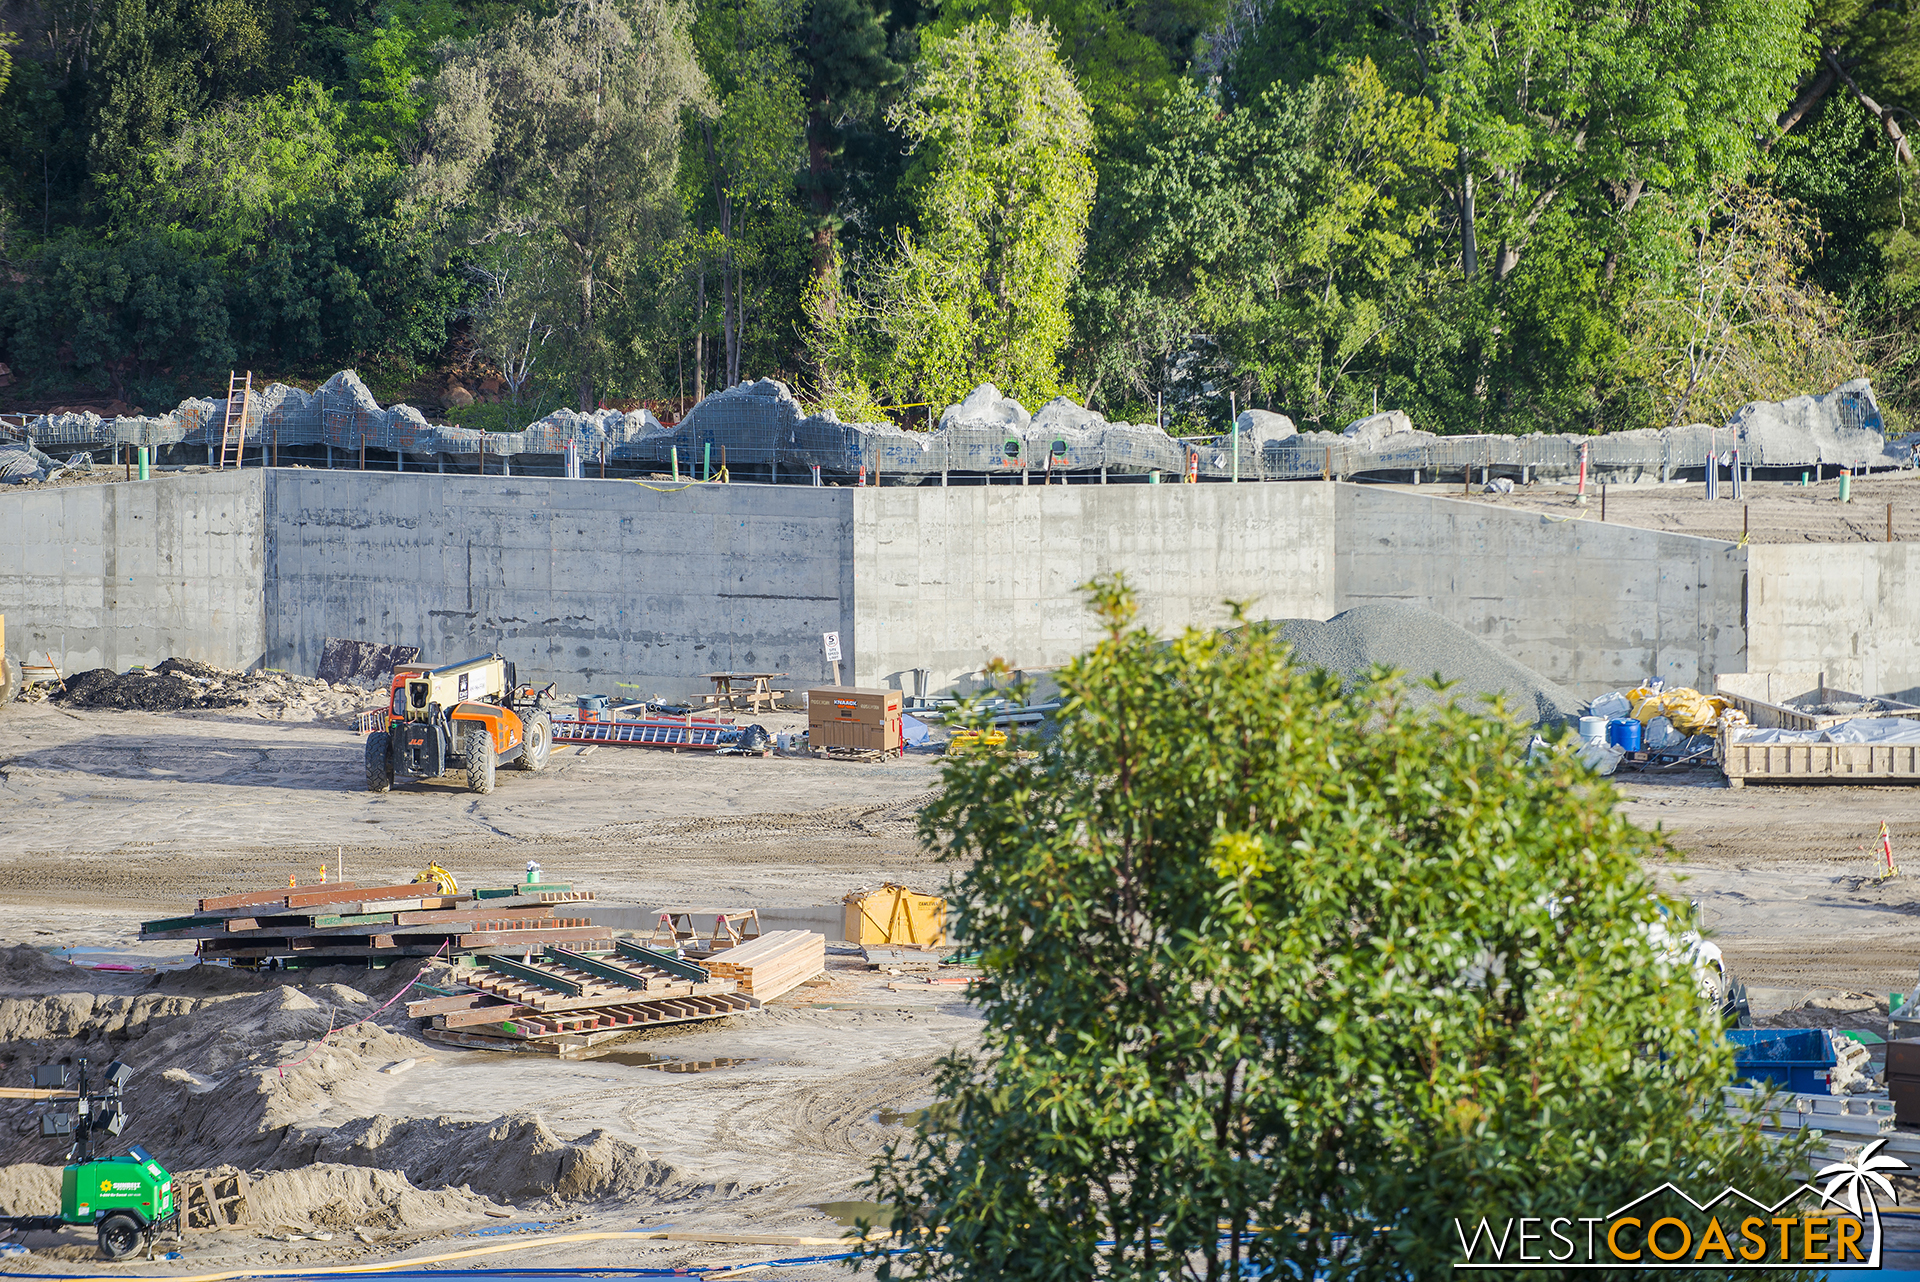  You can see the backside of the plaster that is forming the rockwork that will blend into the American West rustic setting of the Rivers of America. 